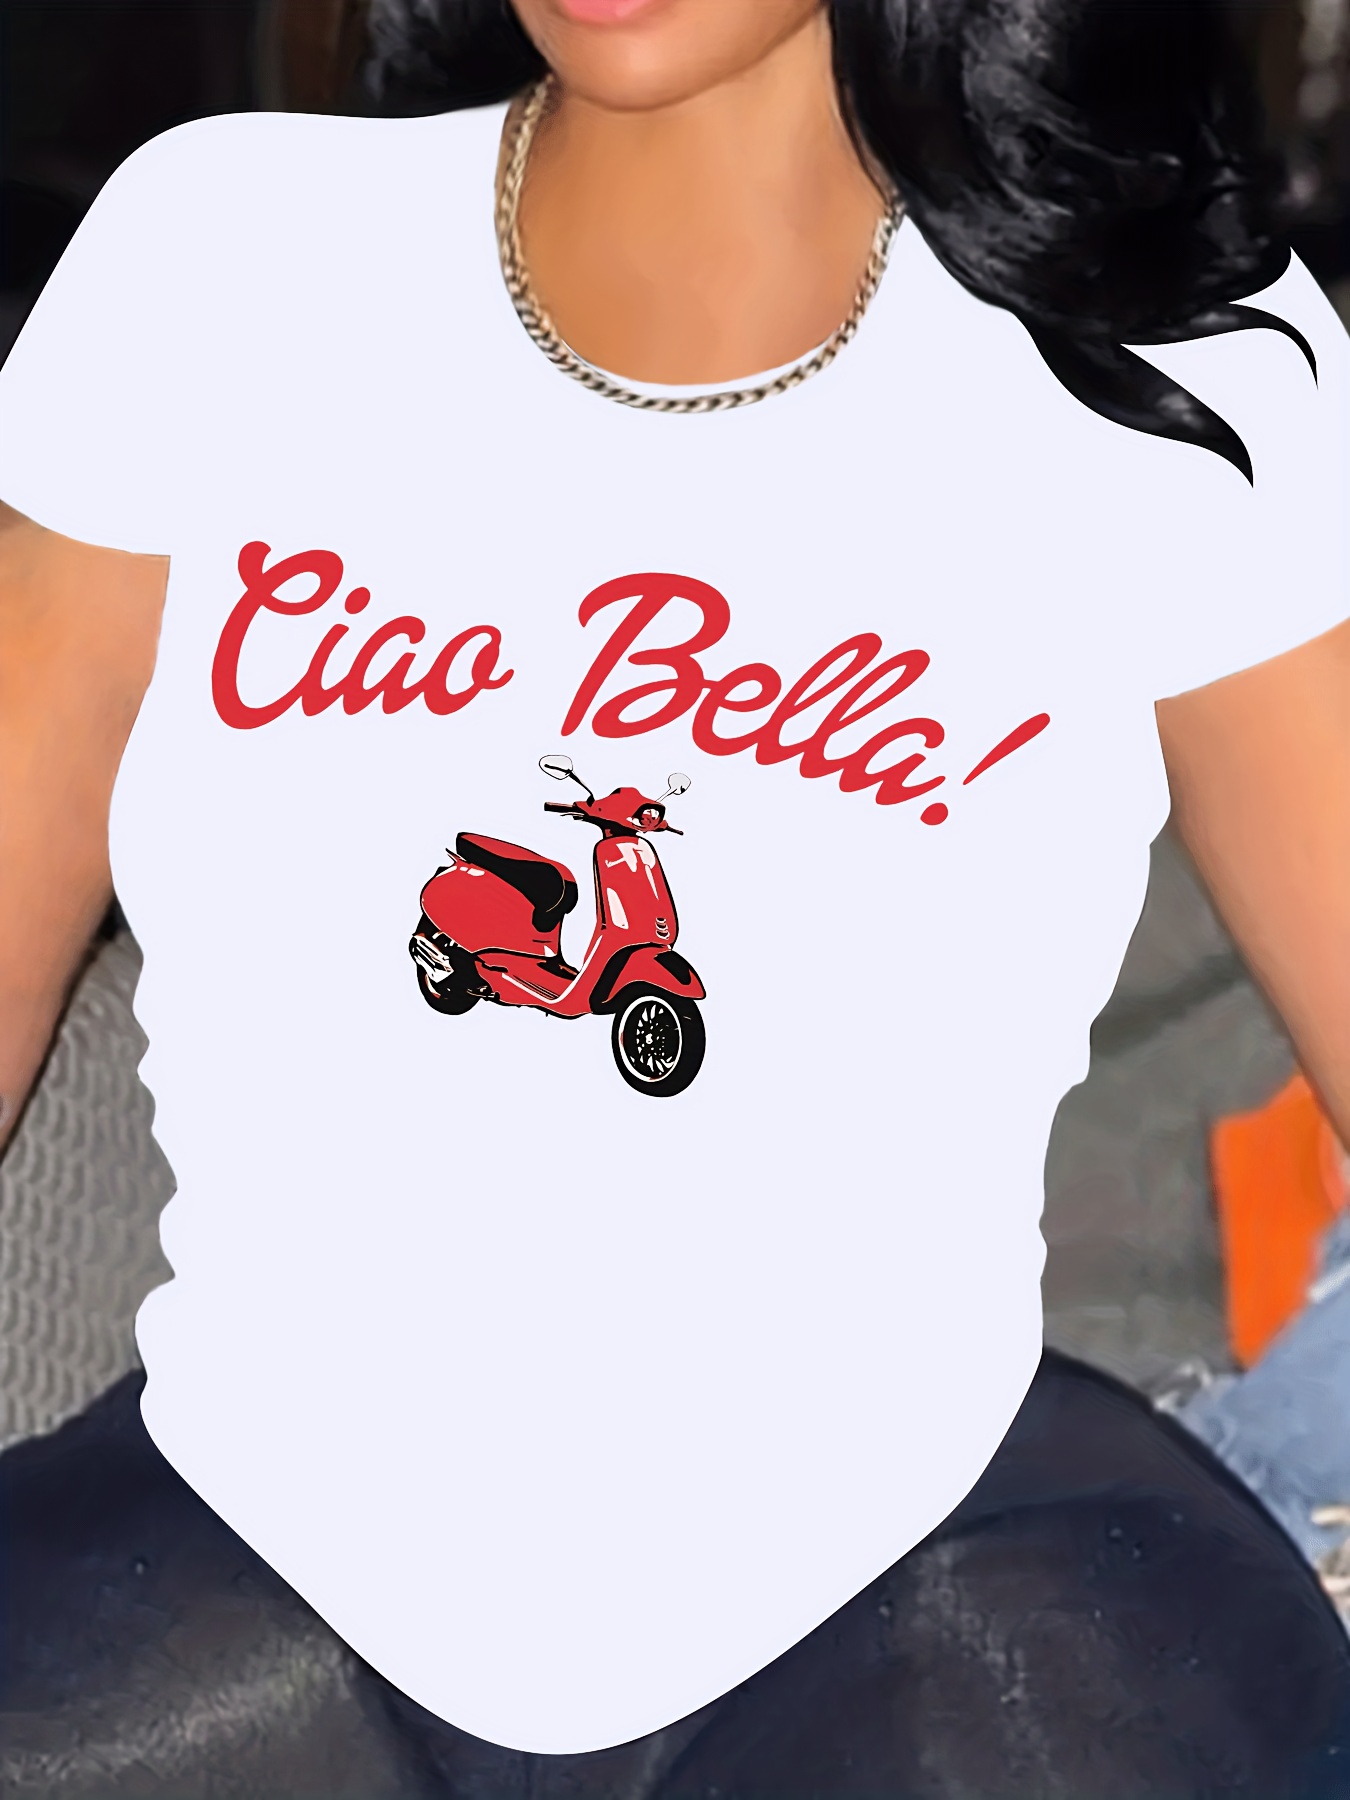 Women s Plus Size Casual Sporty T-Shirt, Ciao Bella! Red Scooter Print, Comfort Fit Short Sleeve Tee, Fashion Breathable Casual Top